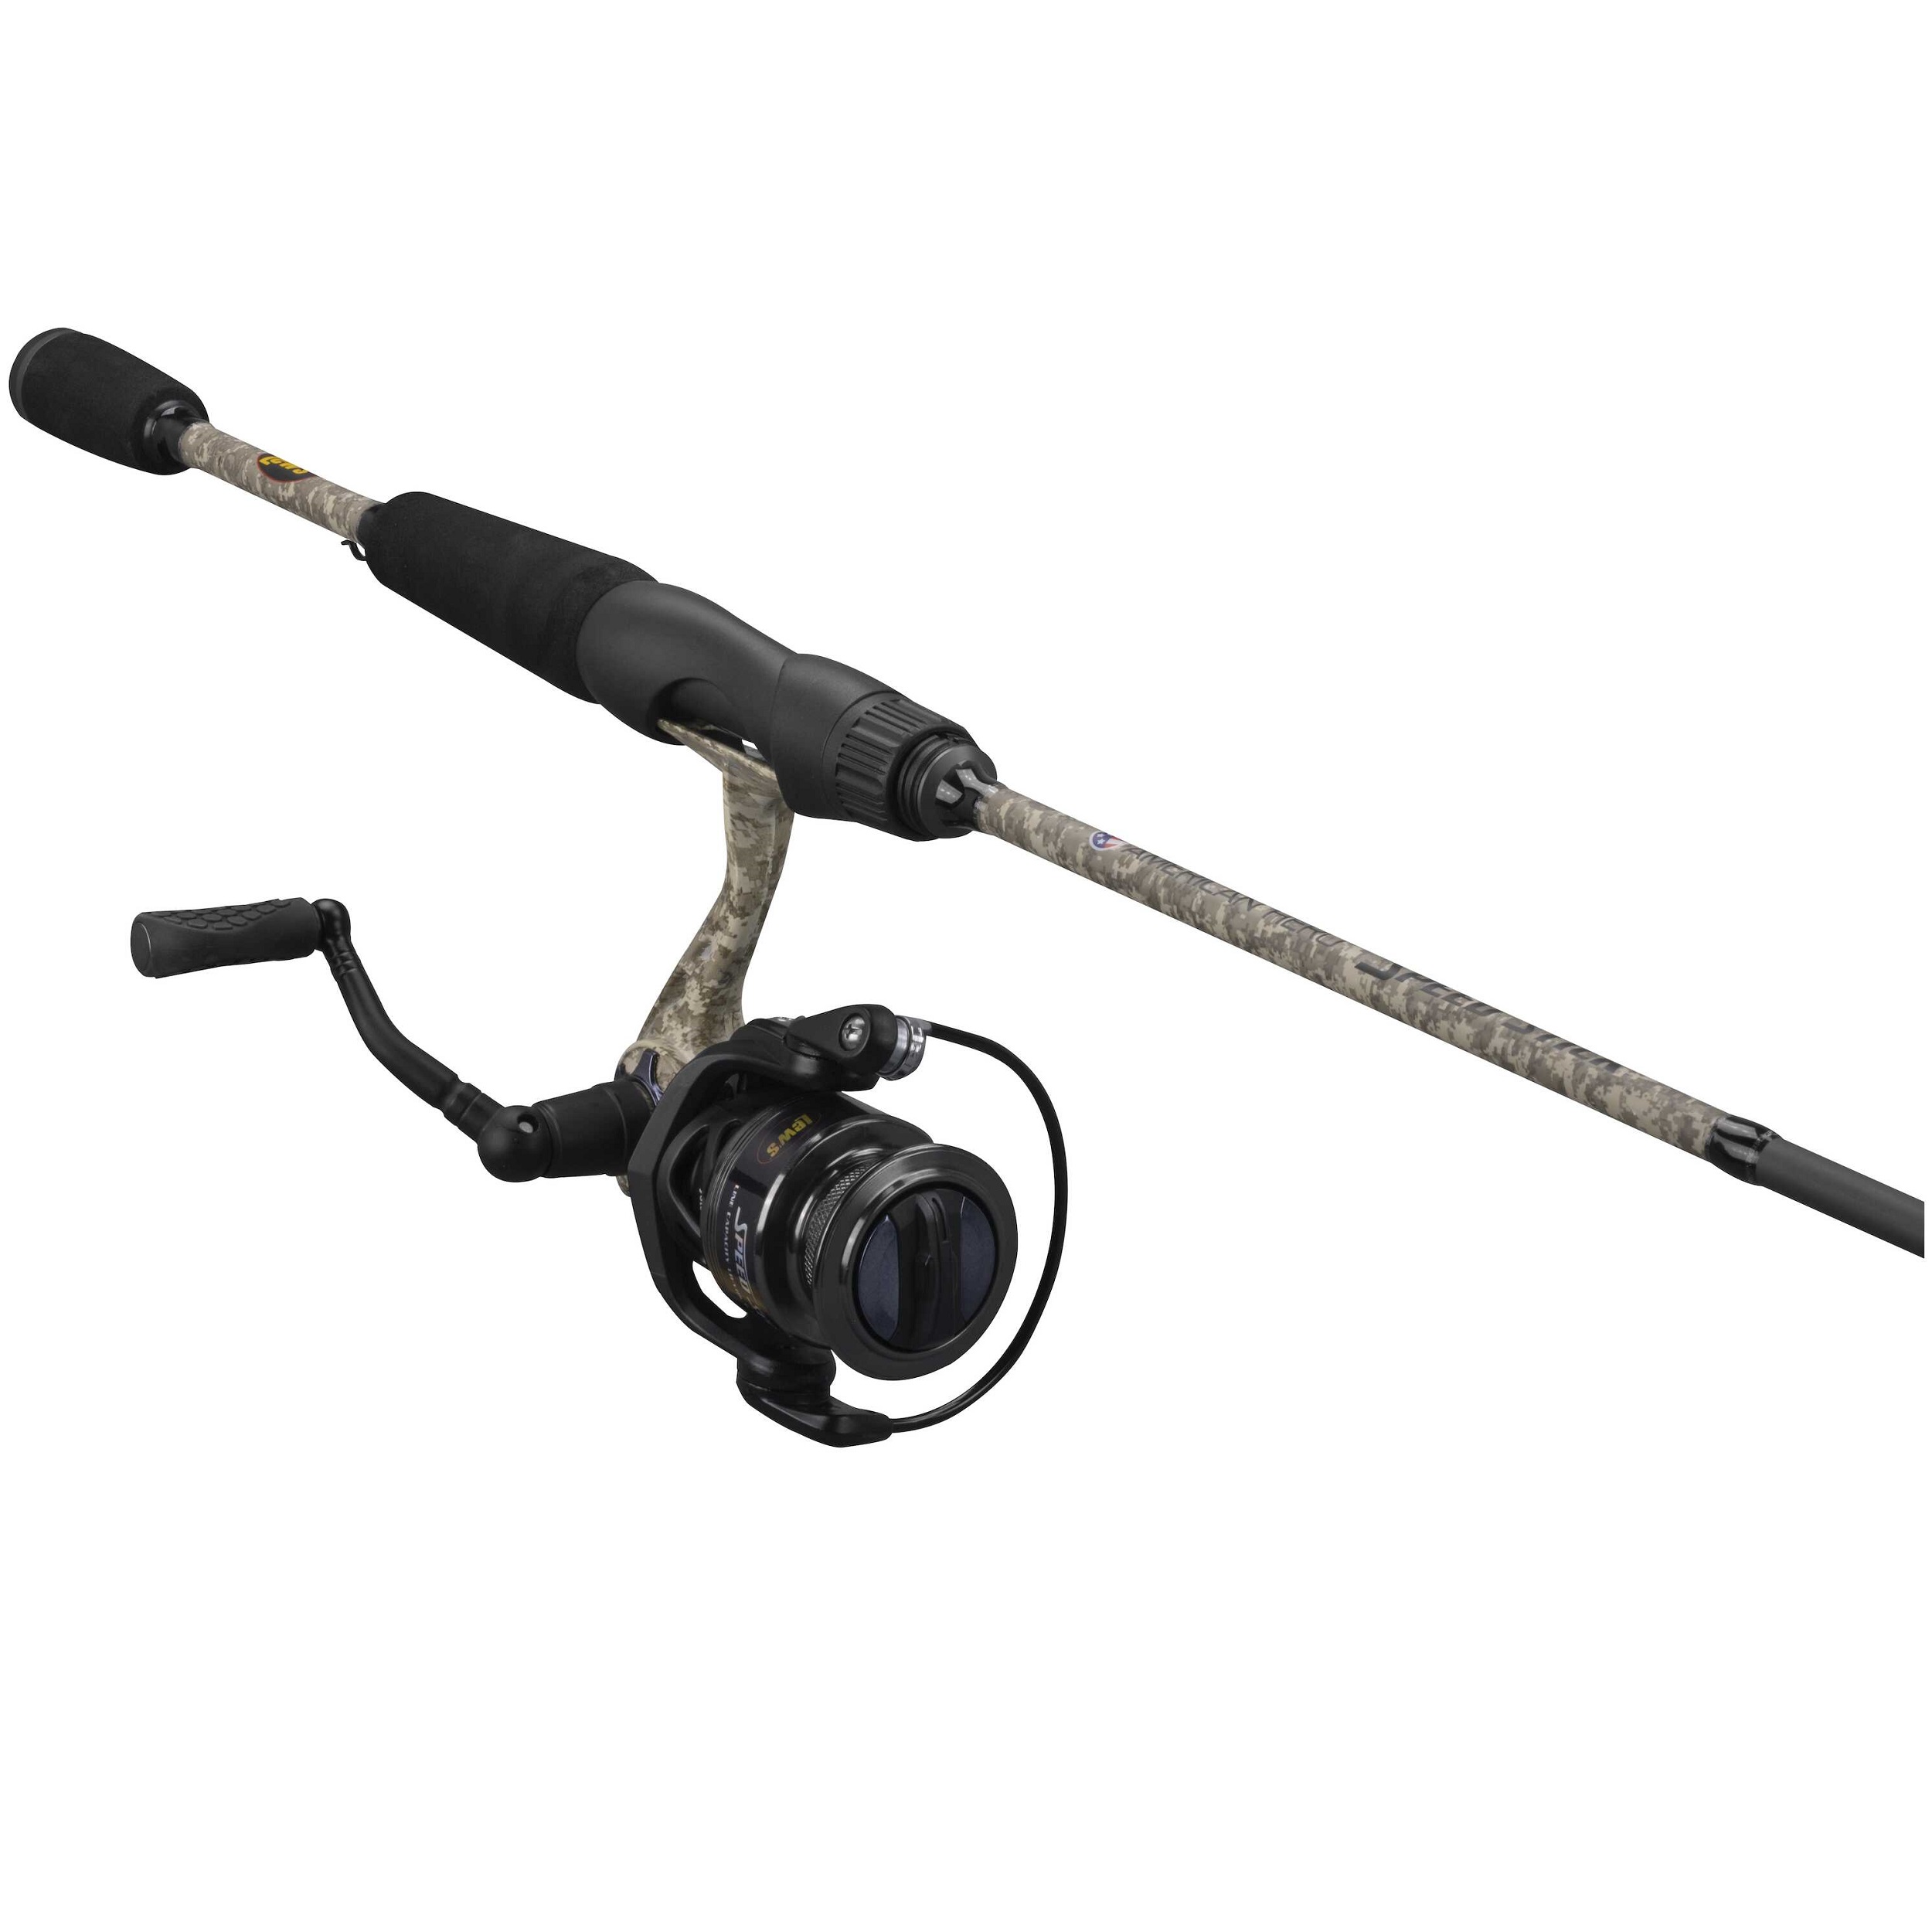 Lew's American Hero Camo 200 6.2:1 6'-2pc Med Spinning Rod and Reel Combo - image 5 of 8